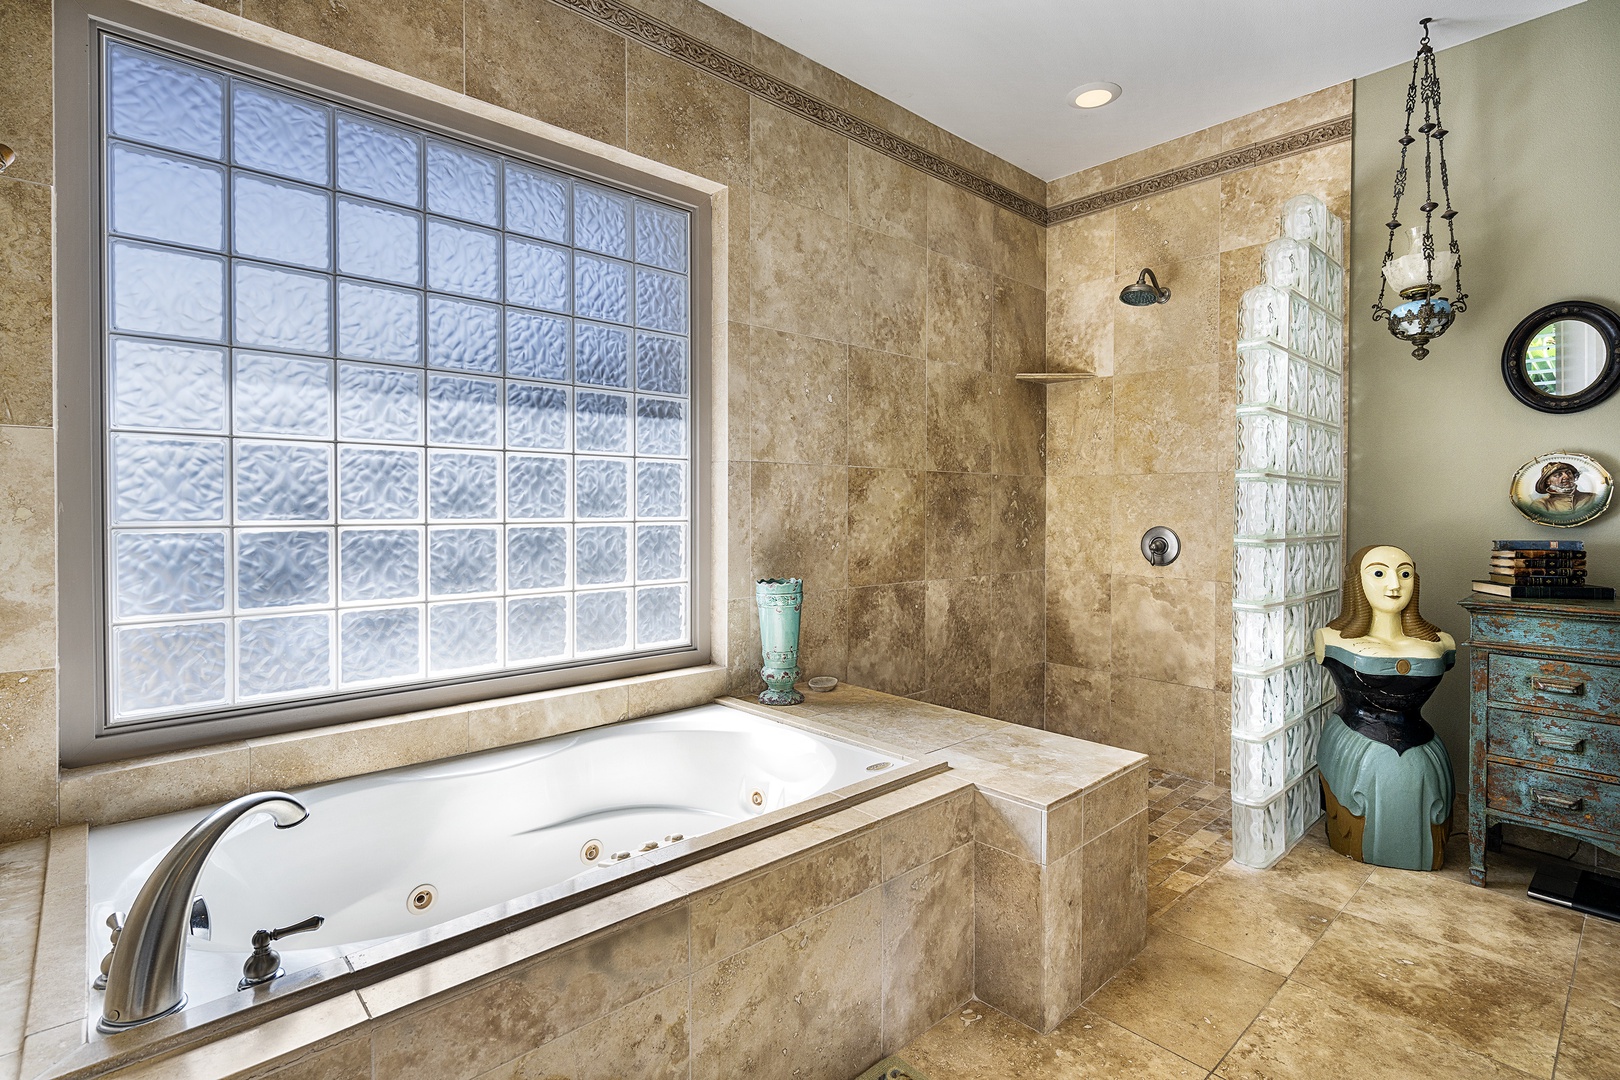 Kailua Kona Vacation Rentals, Hale Aikane - Large soaking tub and walk-in shower can be found in the Primary suite